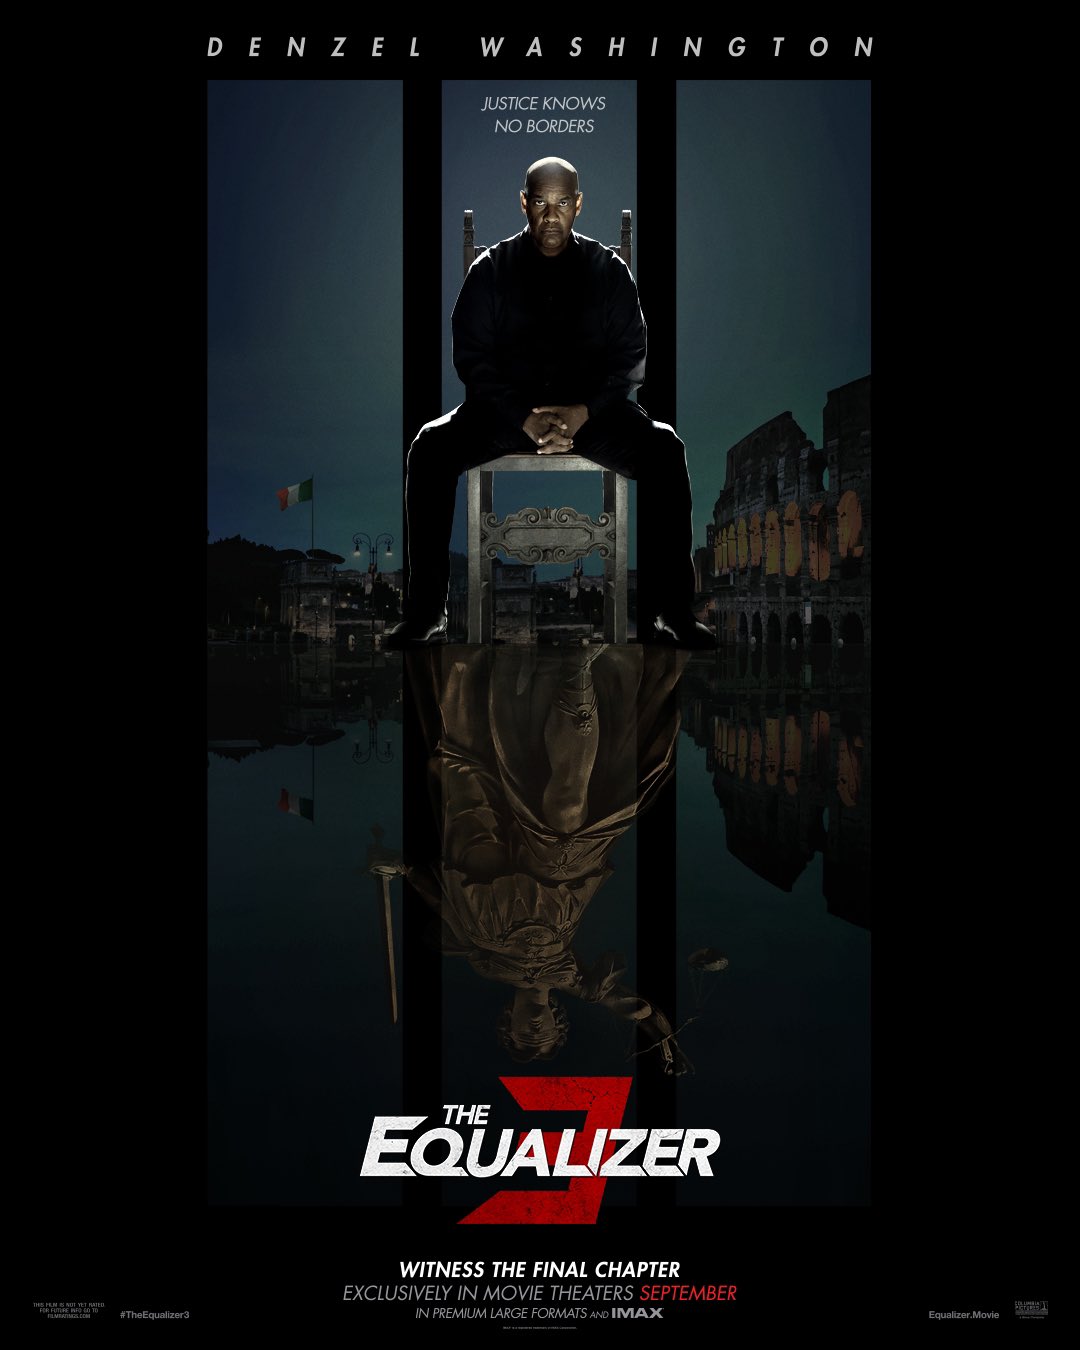 The Equalizer 3: The Final Chapter